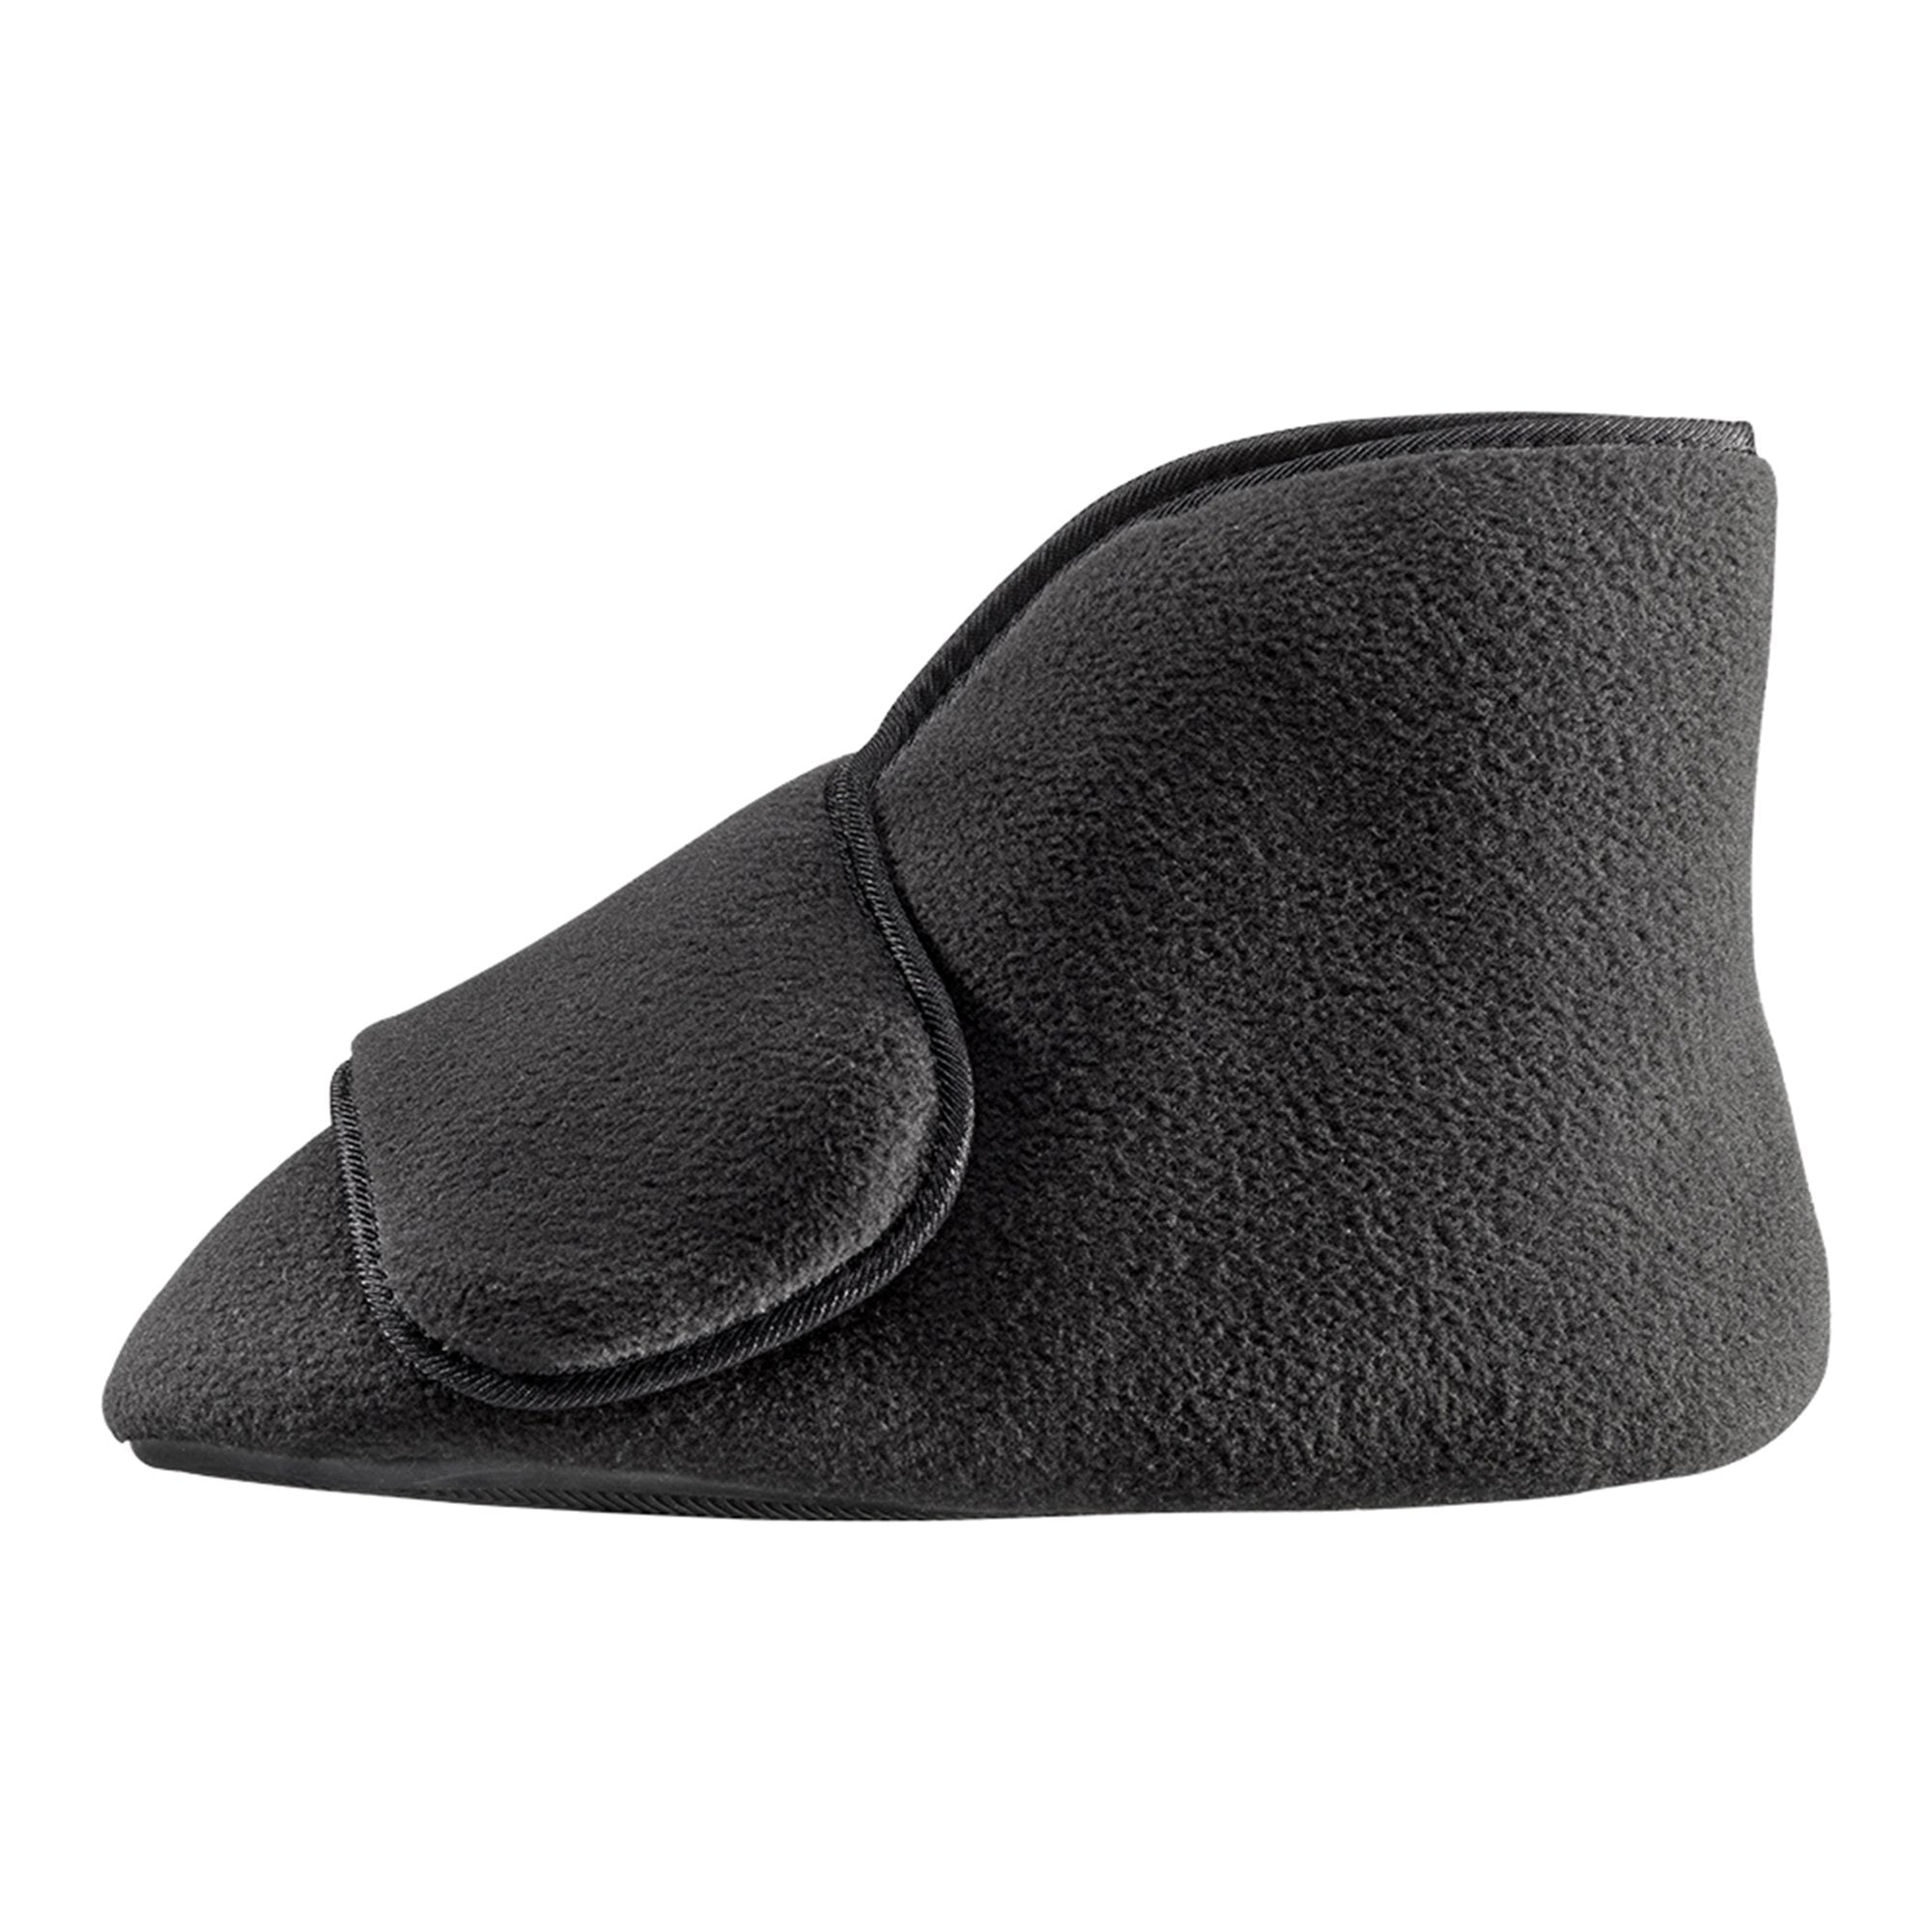 Diabetic Bootie Slippers Silverts Medium / X-Wide Black Ankle High